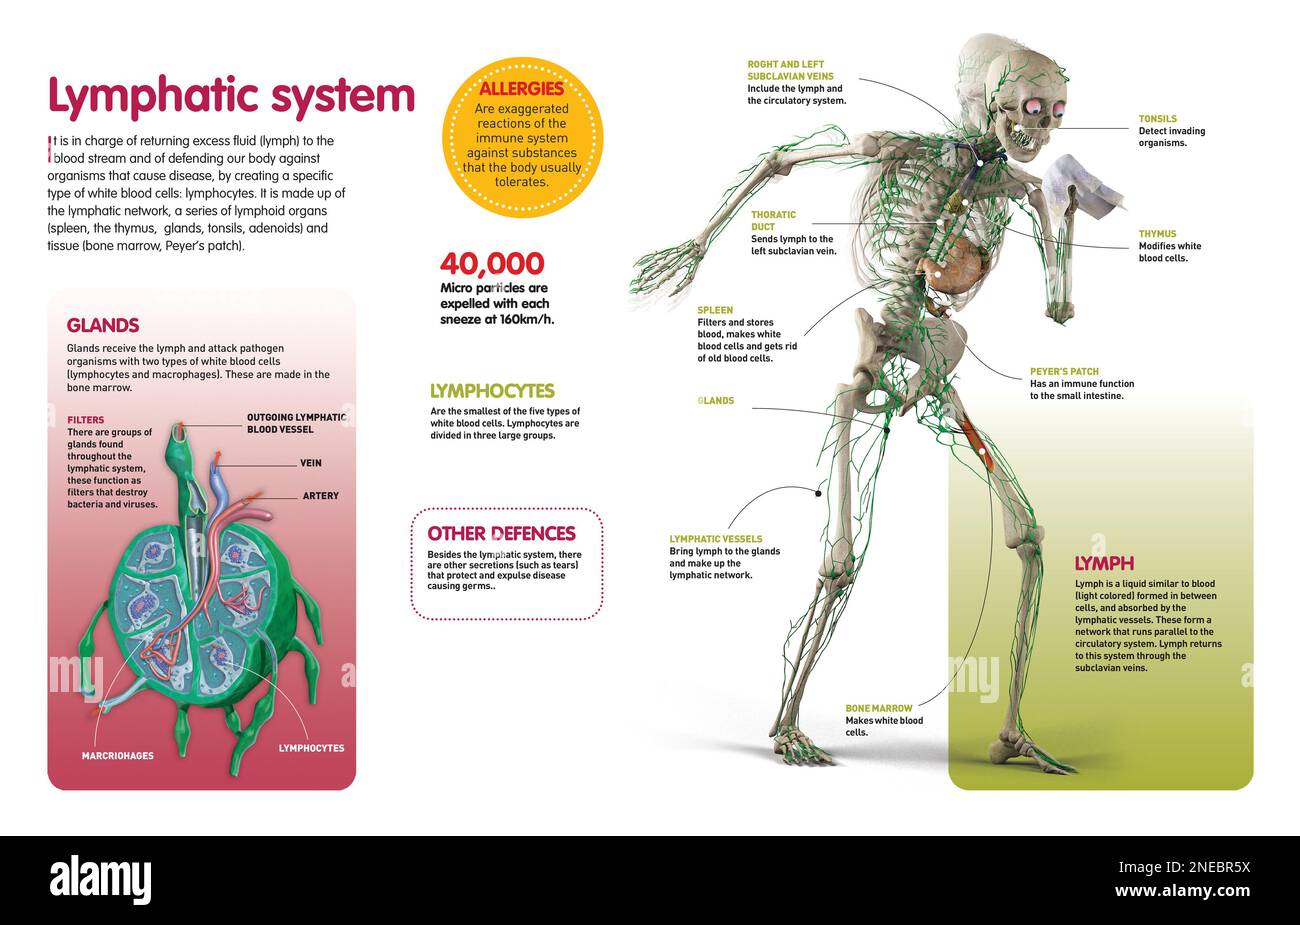 Infographic that describes the functions and components of the lymphatic system, and the structure of the ganglion. [QuarkXPress (.qxp); Adobe InDesign (.indd); QuarkXPress (.qxd); 4960x3188]. Stock Photo